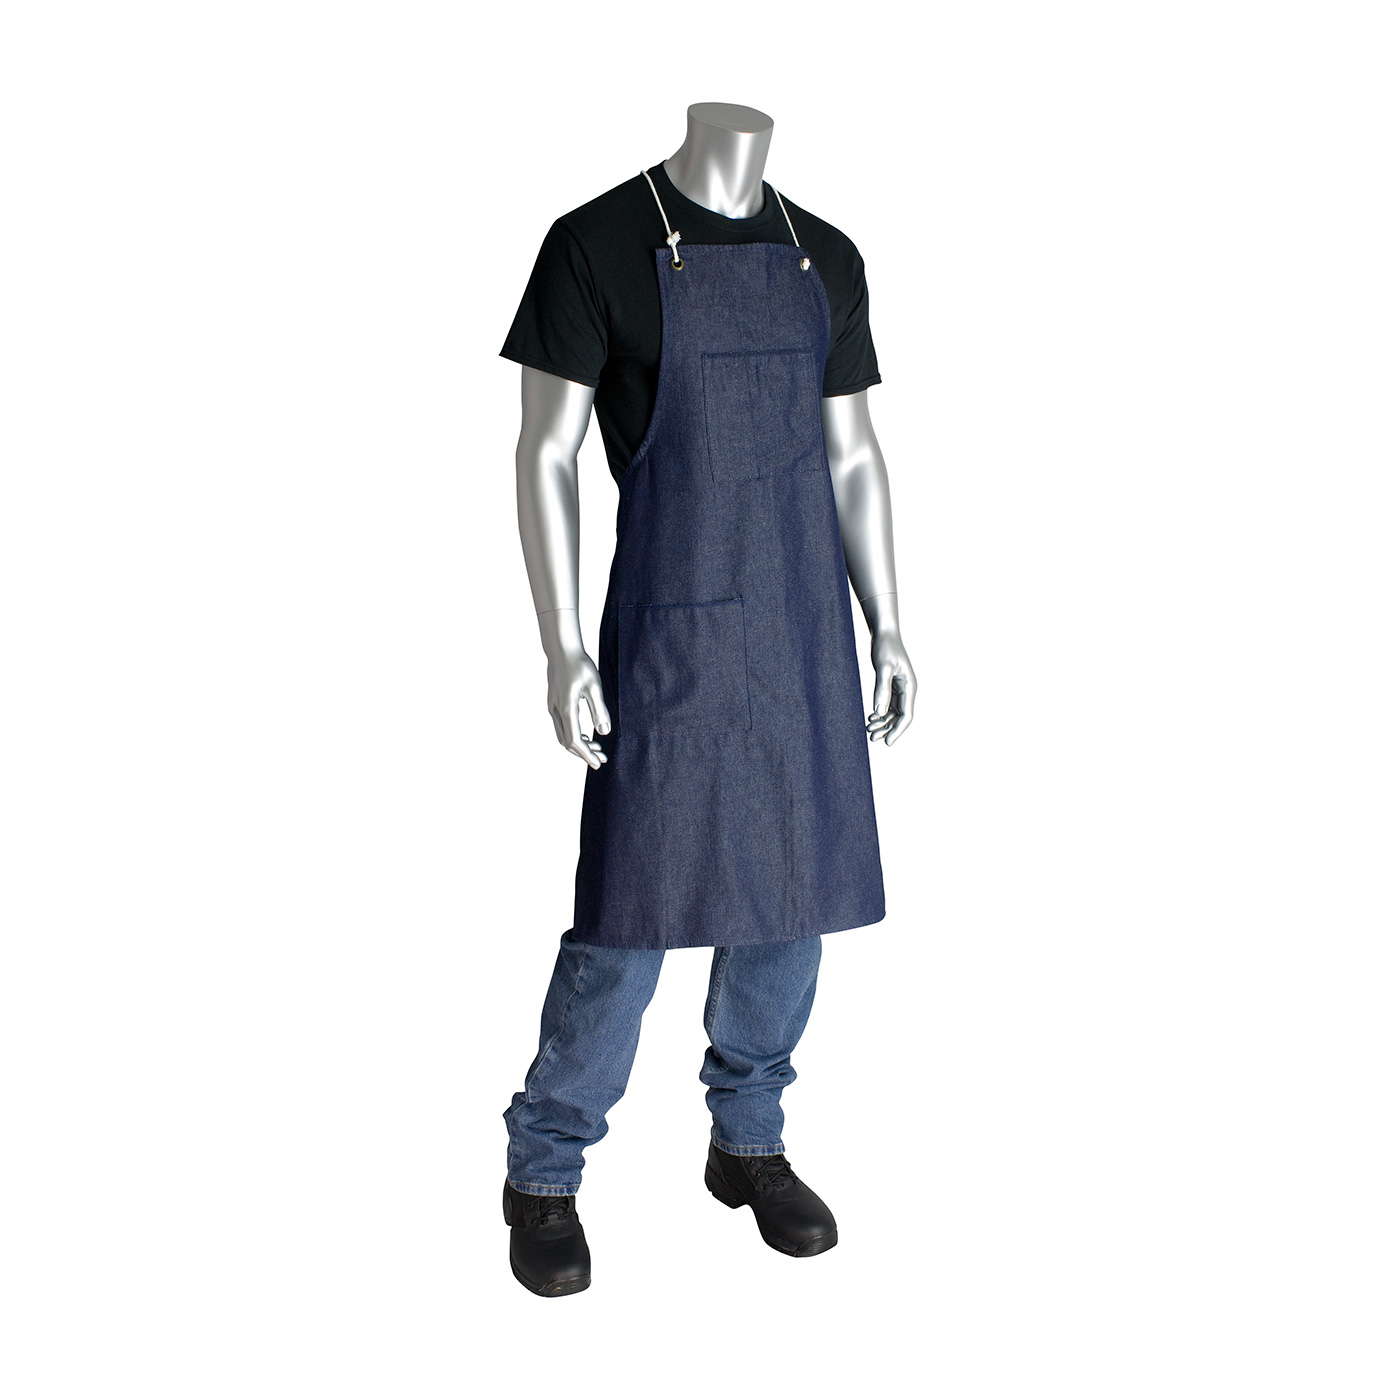 PIP General Use Denim Apron W/ Two Pockets & Metal Grommets - One Size